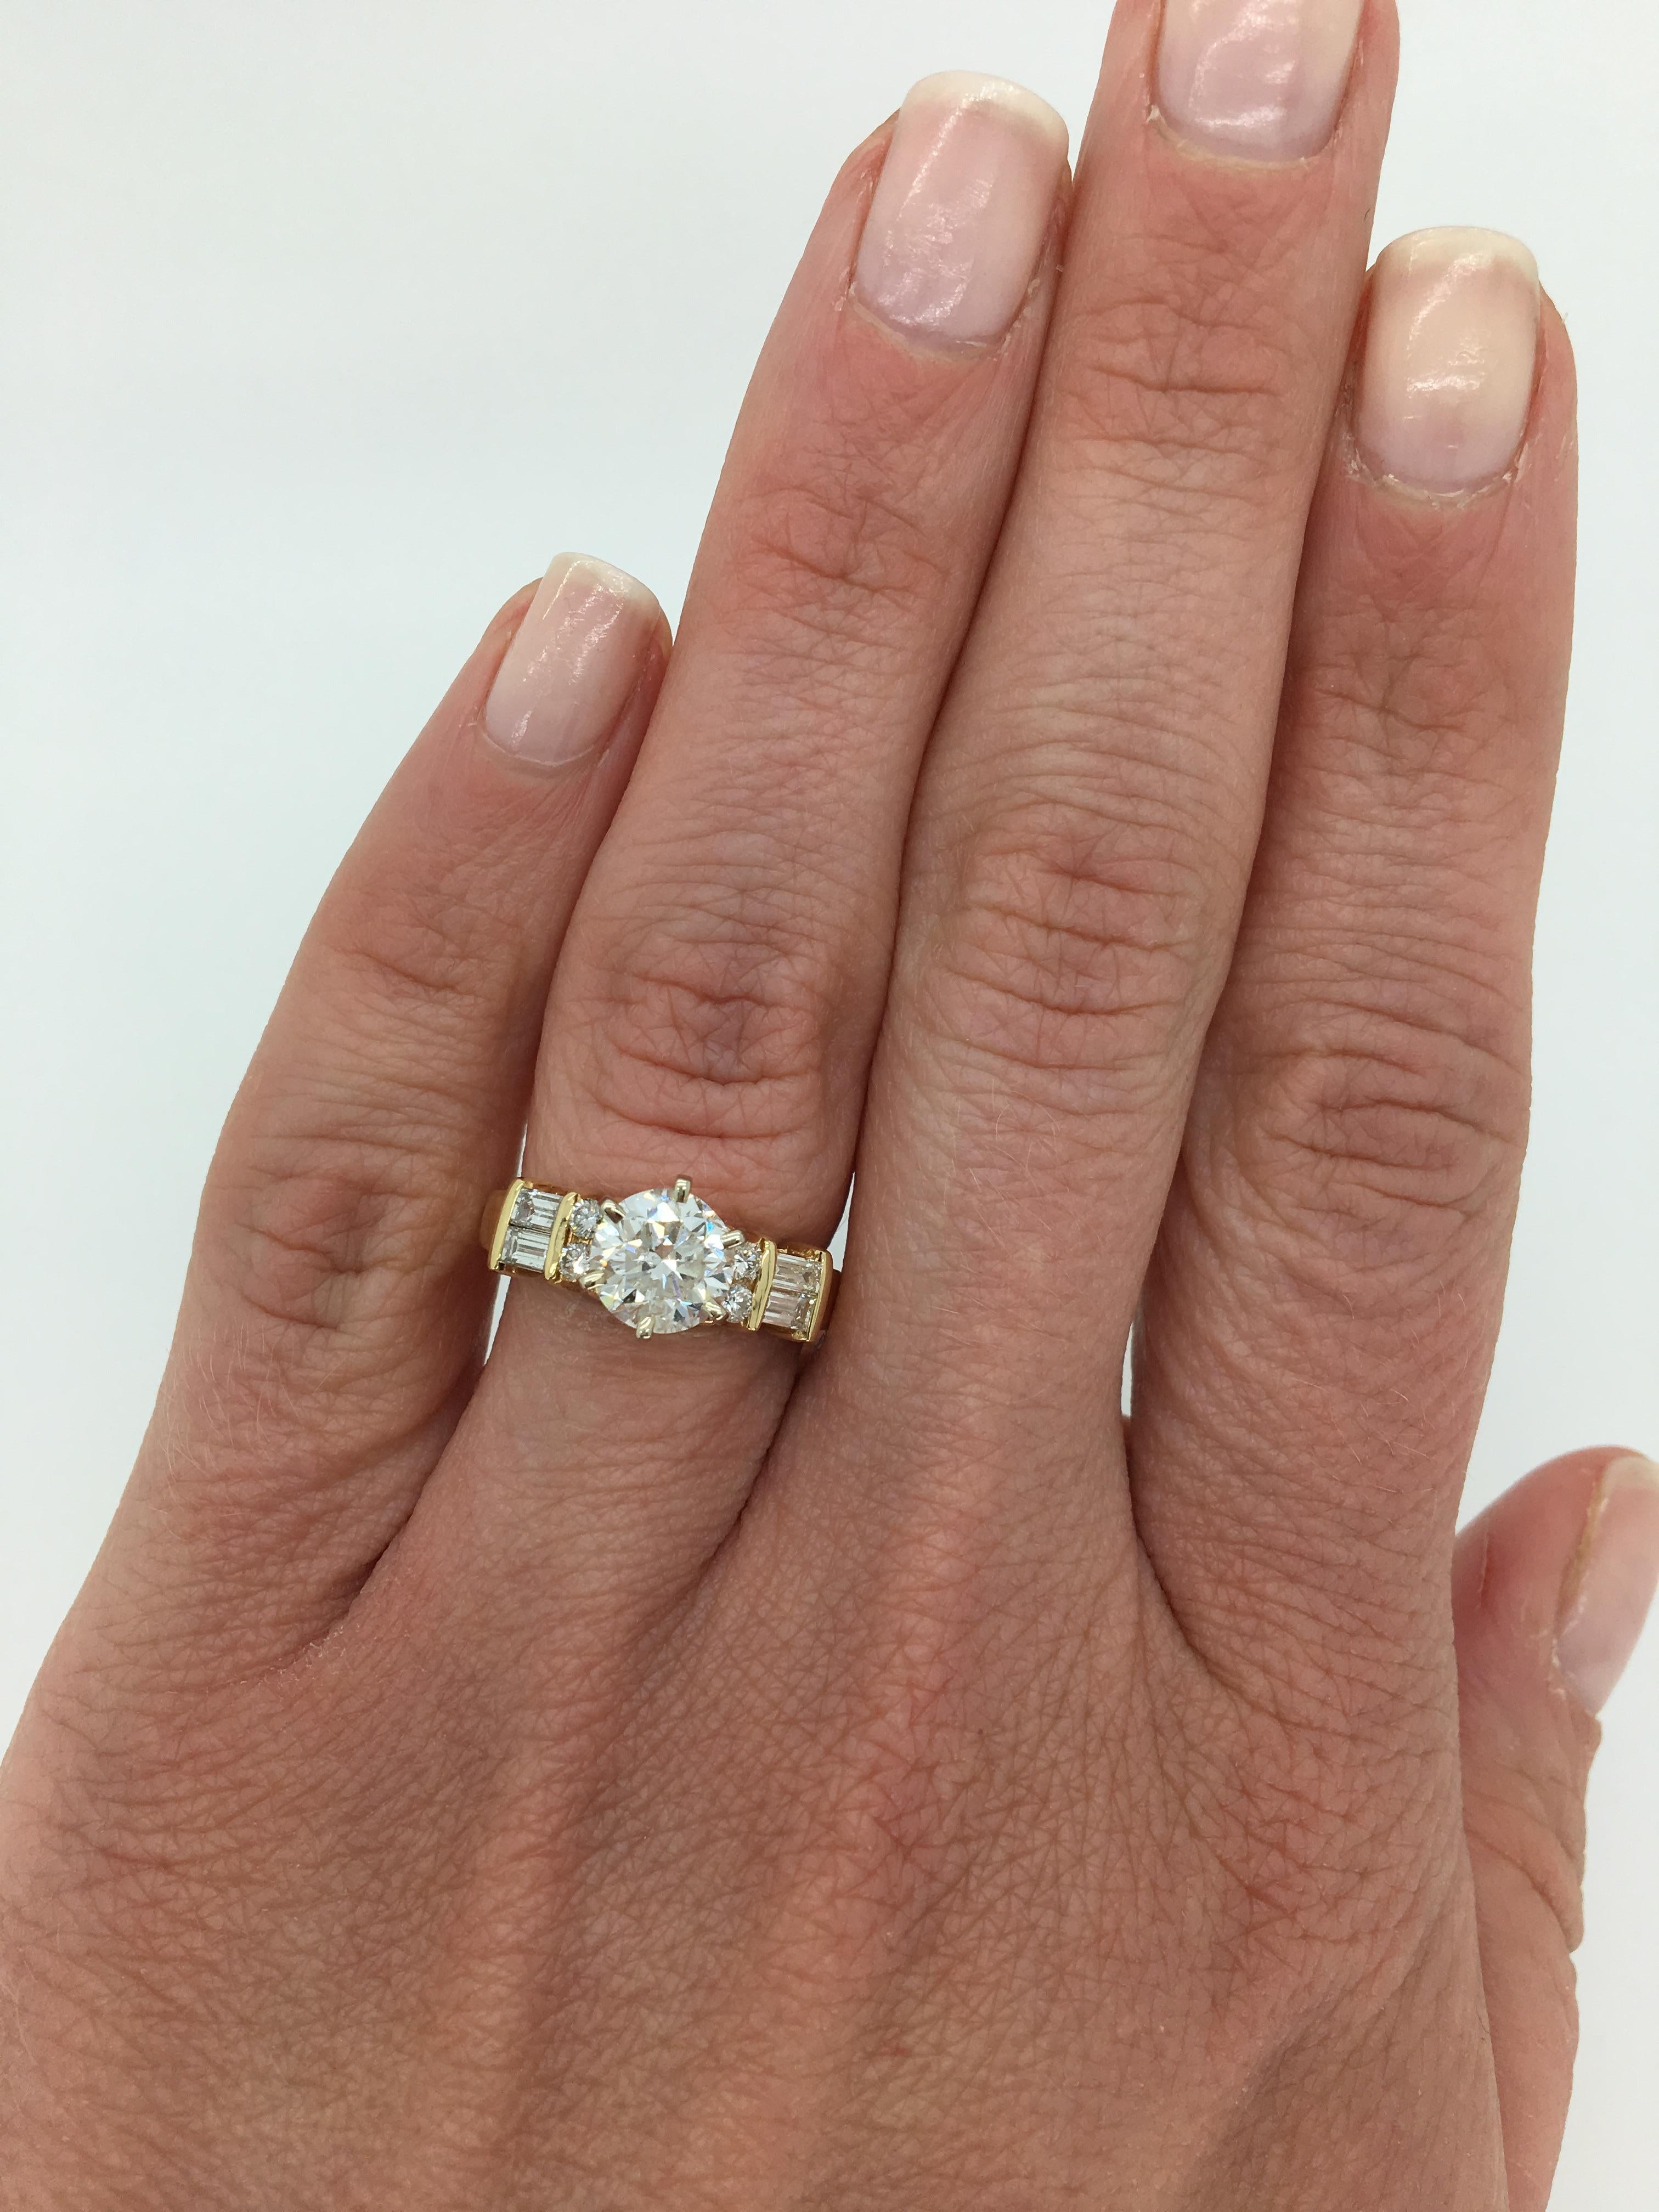 14K yellow gold approximately 1.37CT  Round Brilliant Cut diamond engagement ring with classic baguette and round brilliant cut diamond accents. 

Center Diamond Carat Weight: Approximately 1.37CT
Center Diamond Cut: Round Brilliant Cut
Center